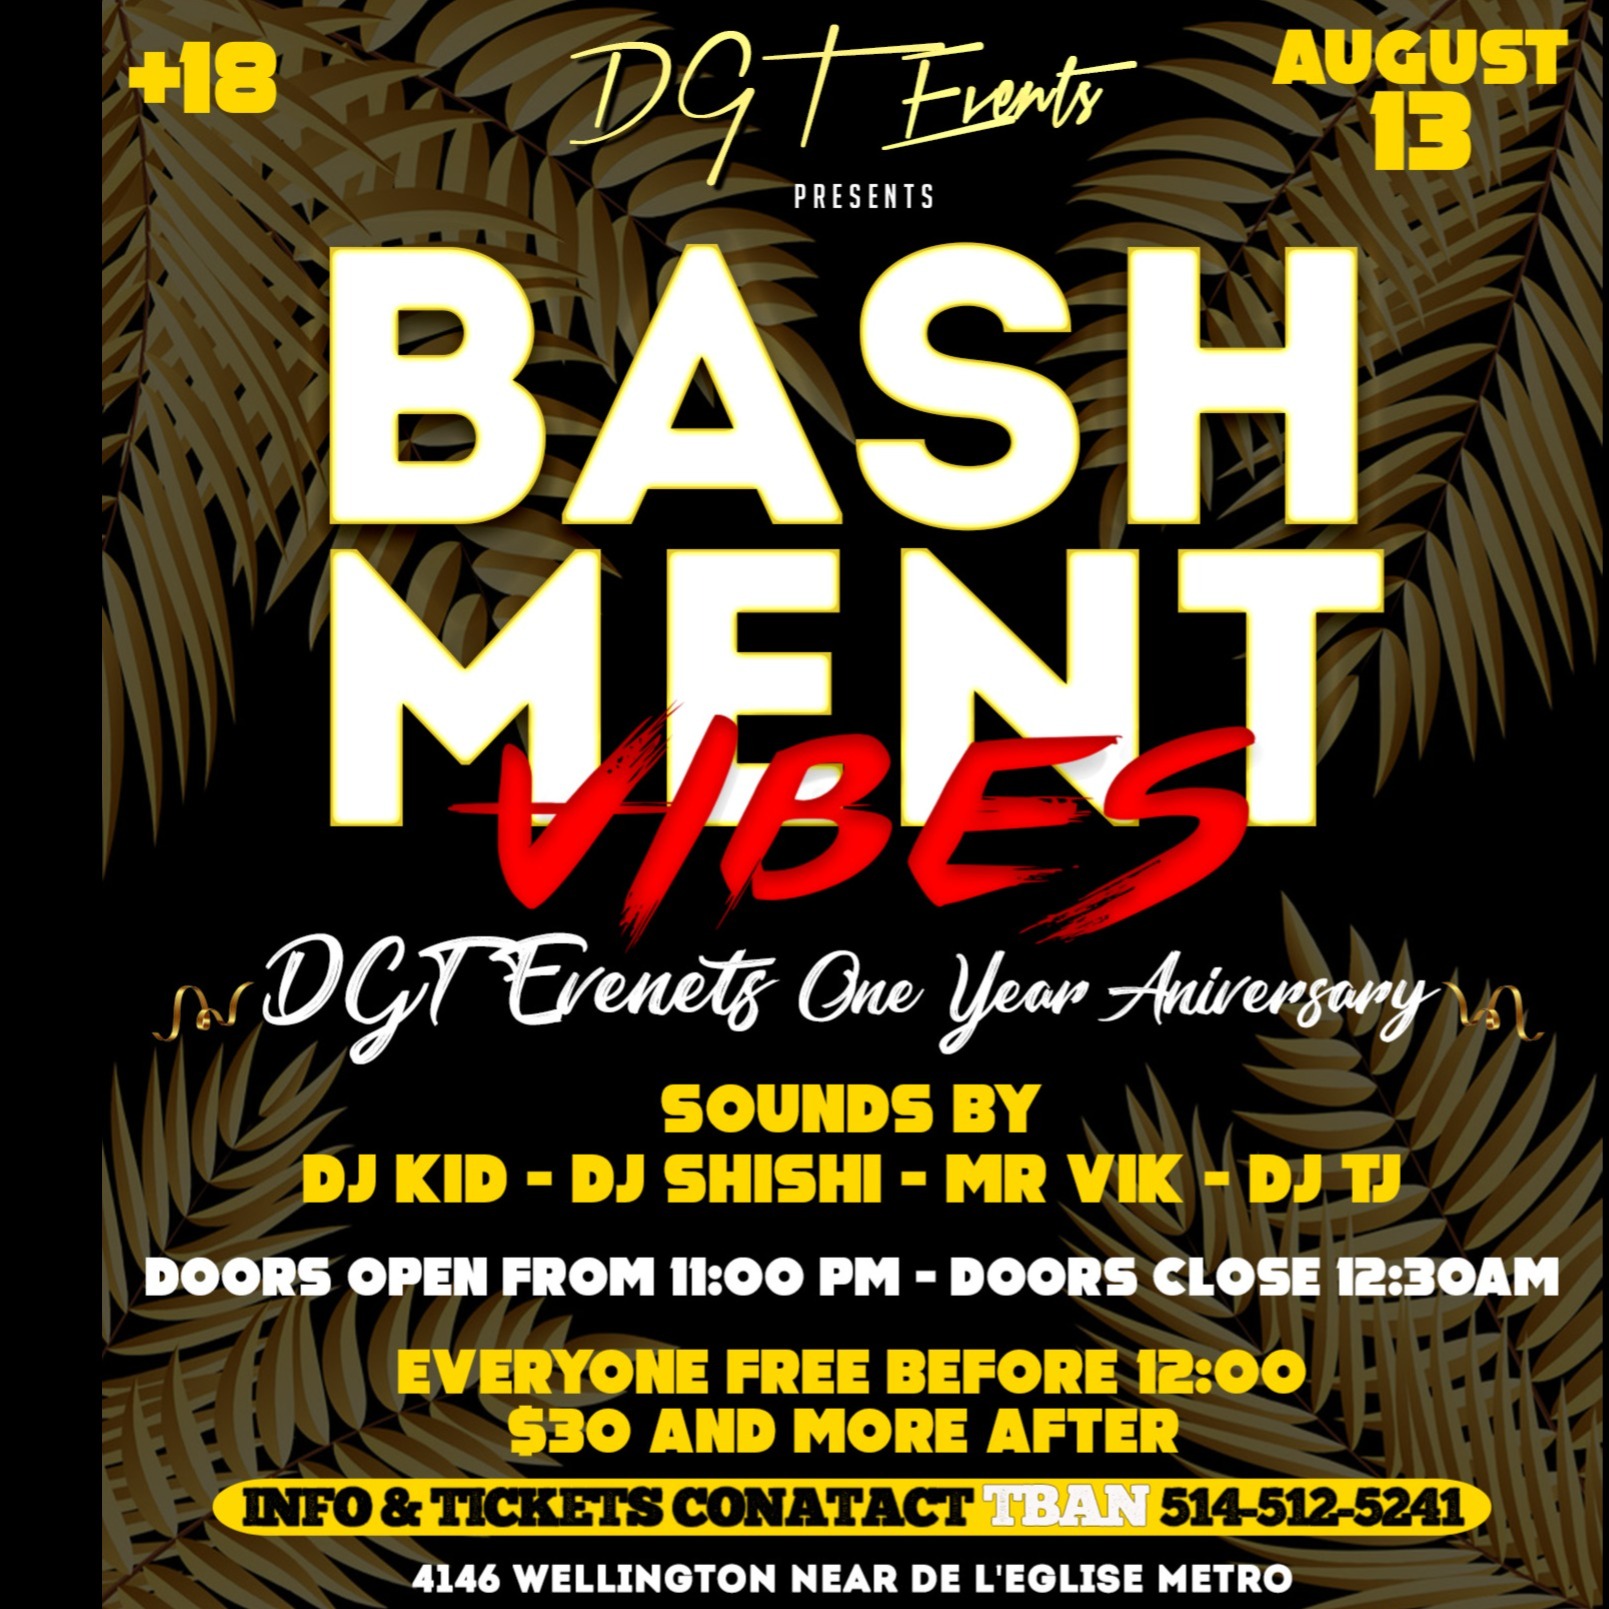 BASHMENT VYBES -  DGT EVENTS 1 YEAR ANIVERSARY 